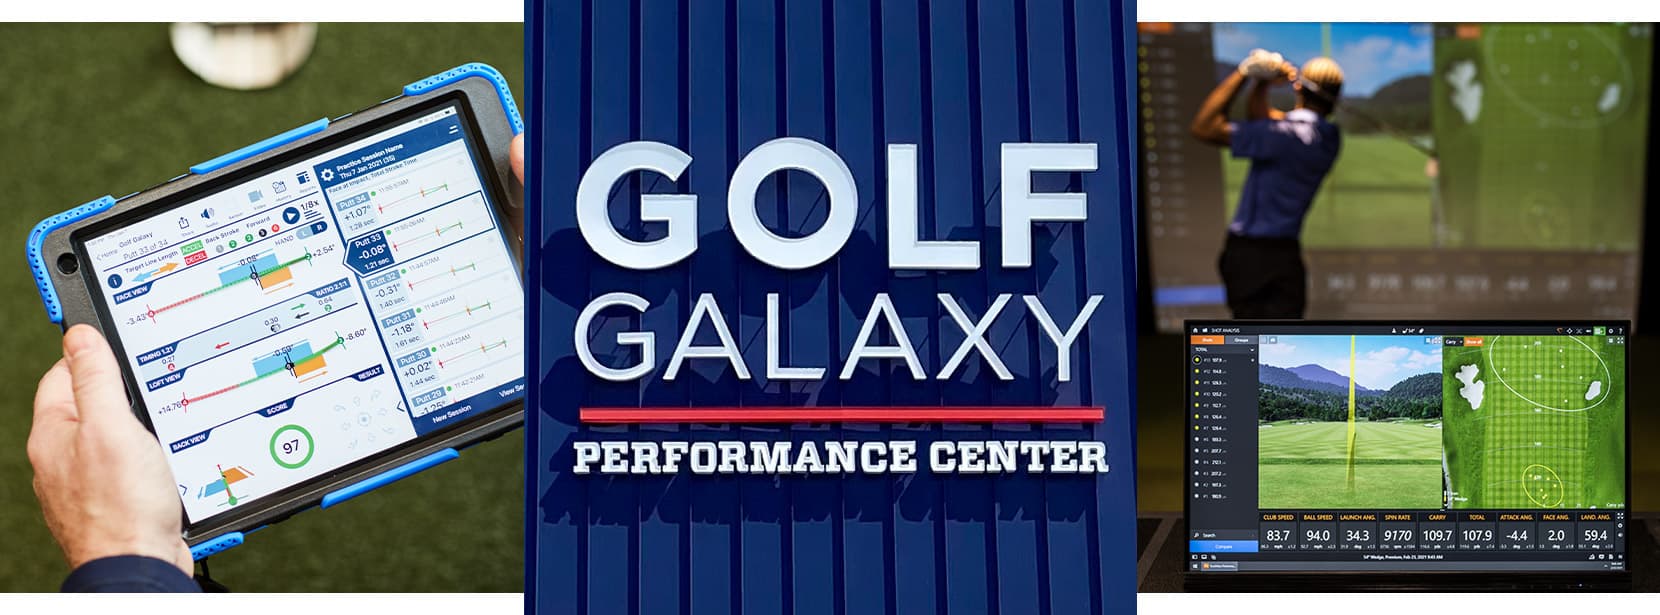 An Image Of Golf Galaxy Performance Center And The Latest Golf Technology